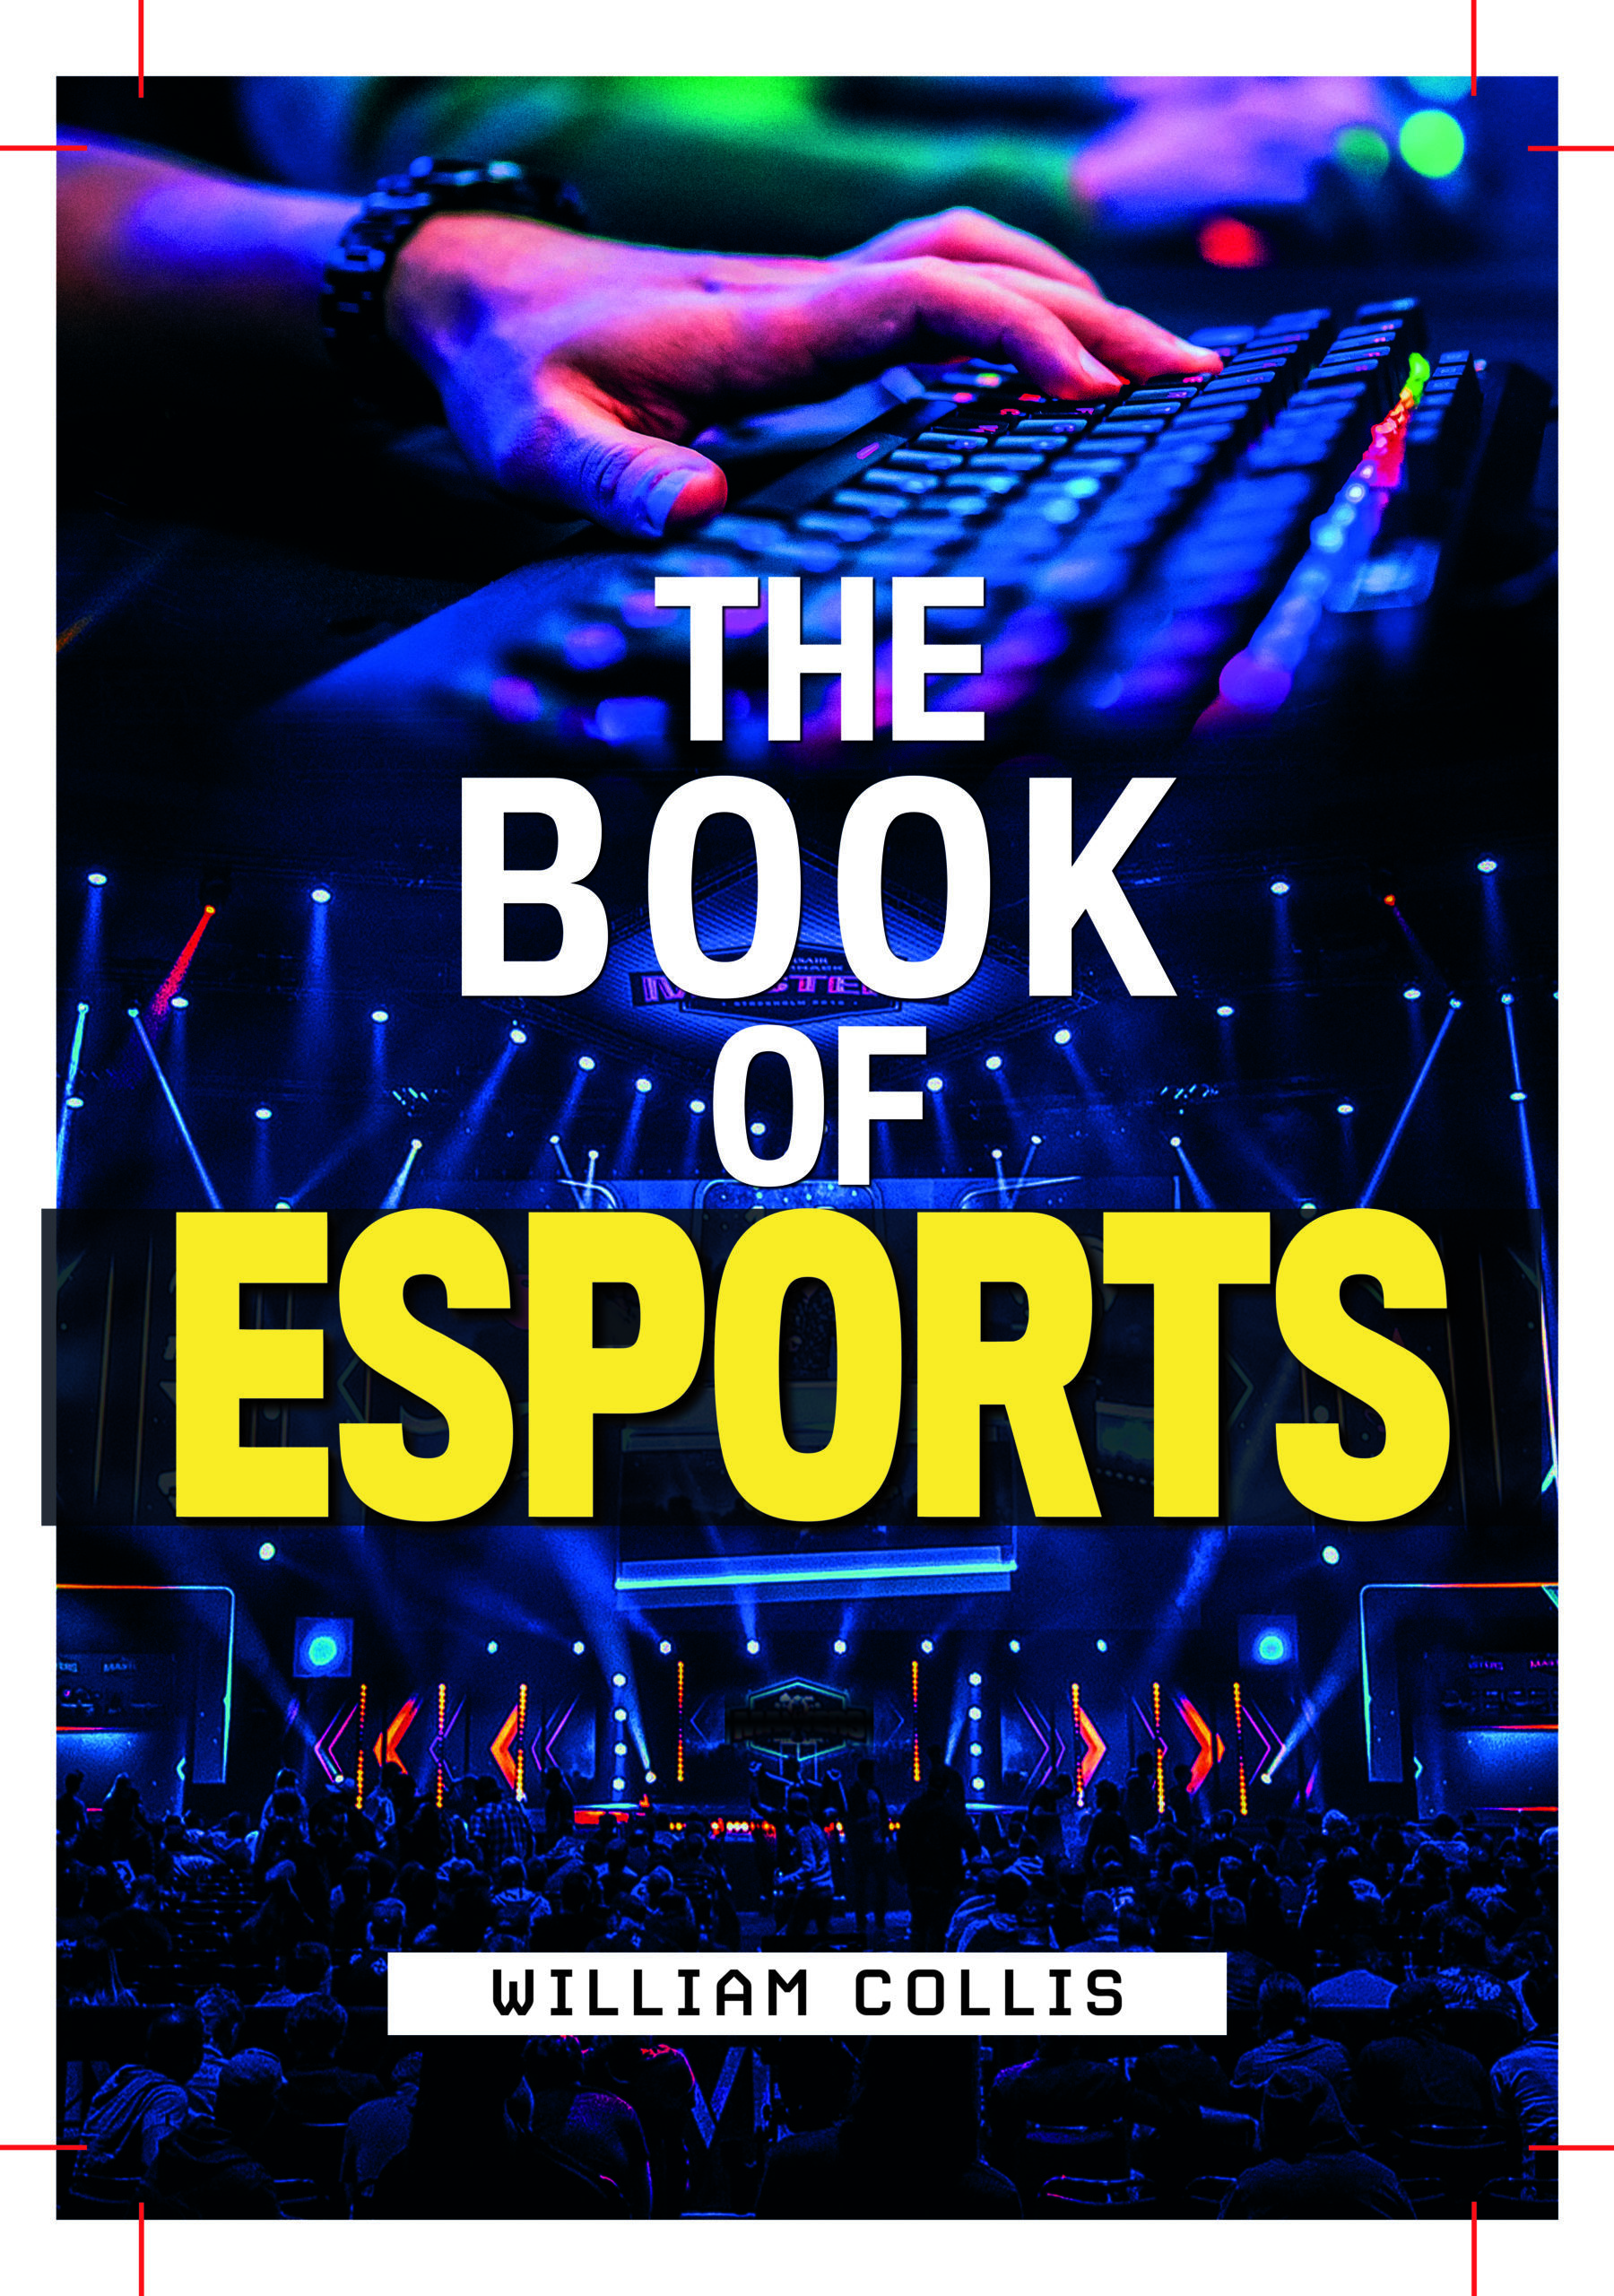 http://www.williamcollis.com/wp-content/uploads/2020/03/The-Book-of-Esports-PRINT-scaled-1800x2560.jpg